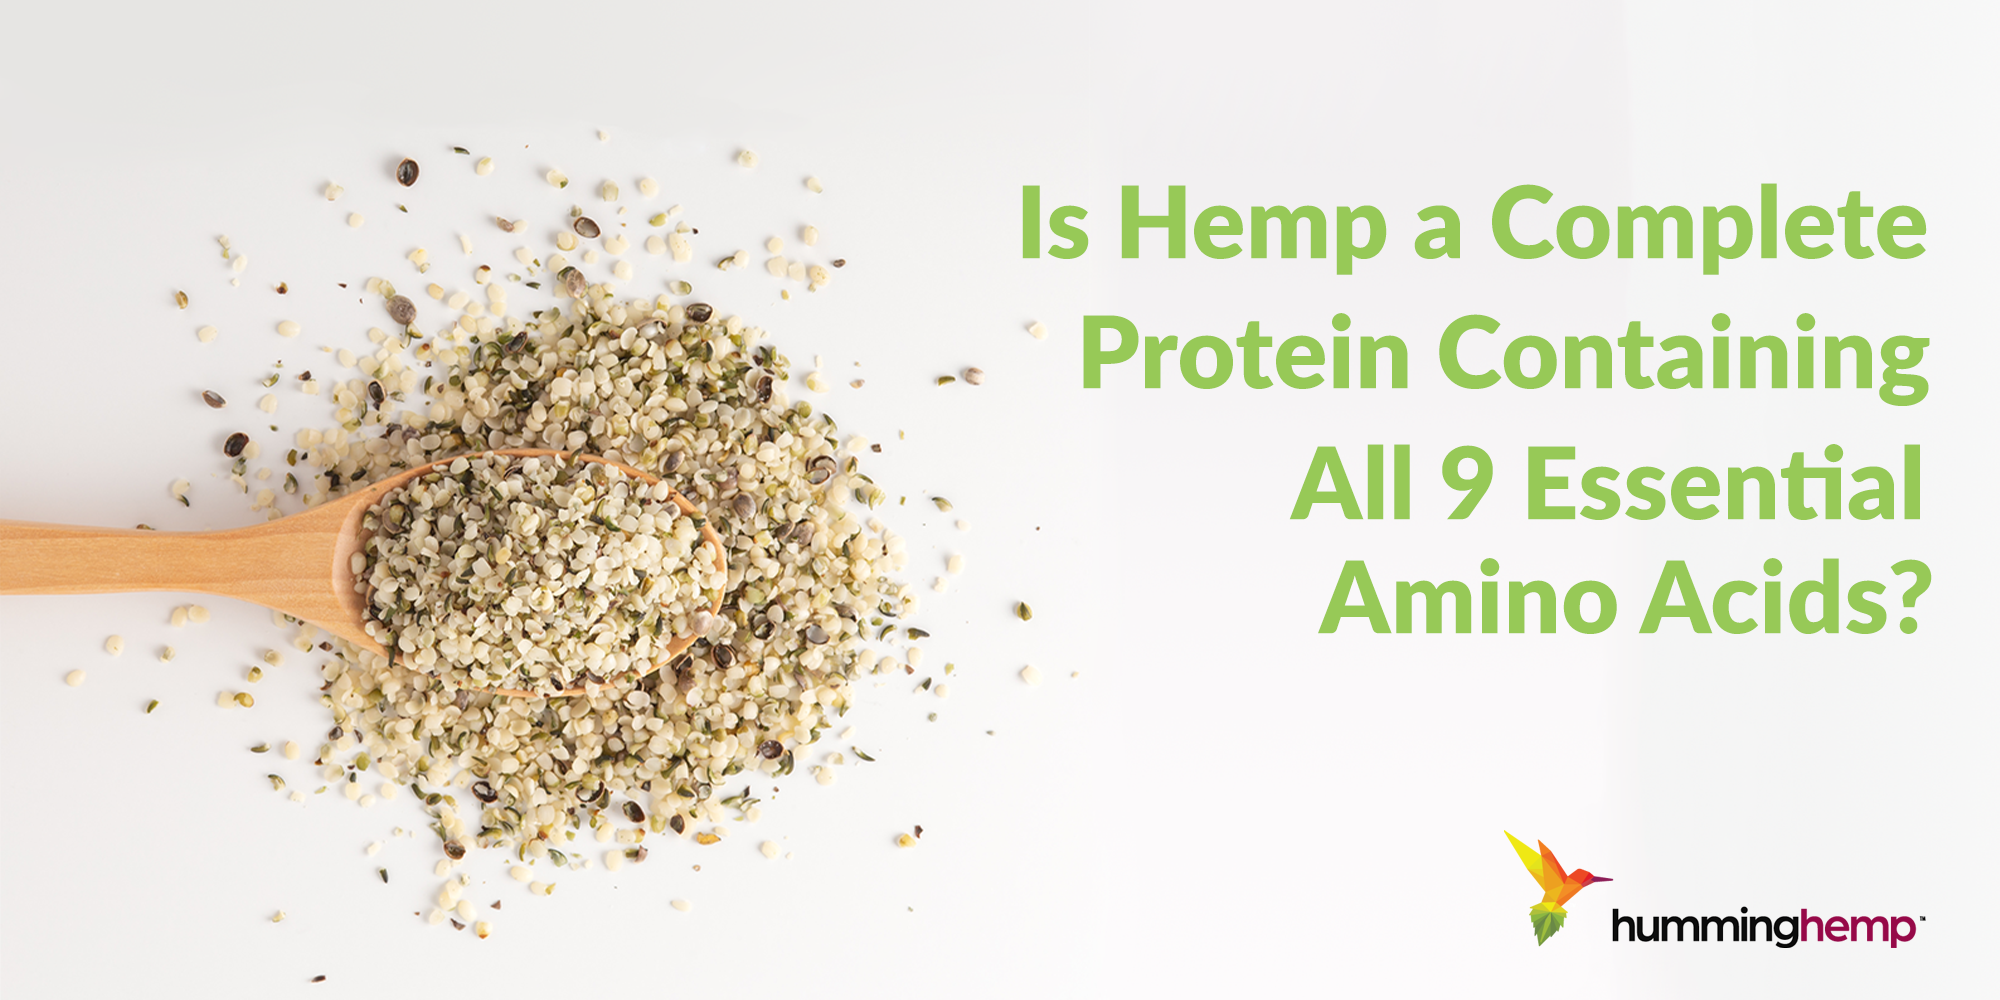 Is hemp a complete protein containing all 9 essential amino acids FI